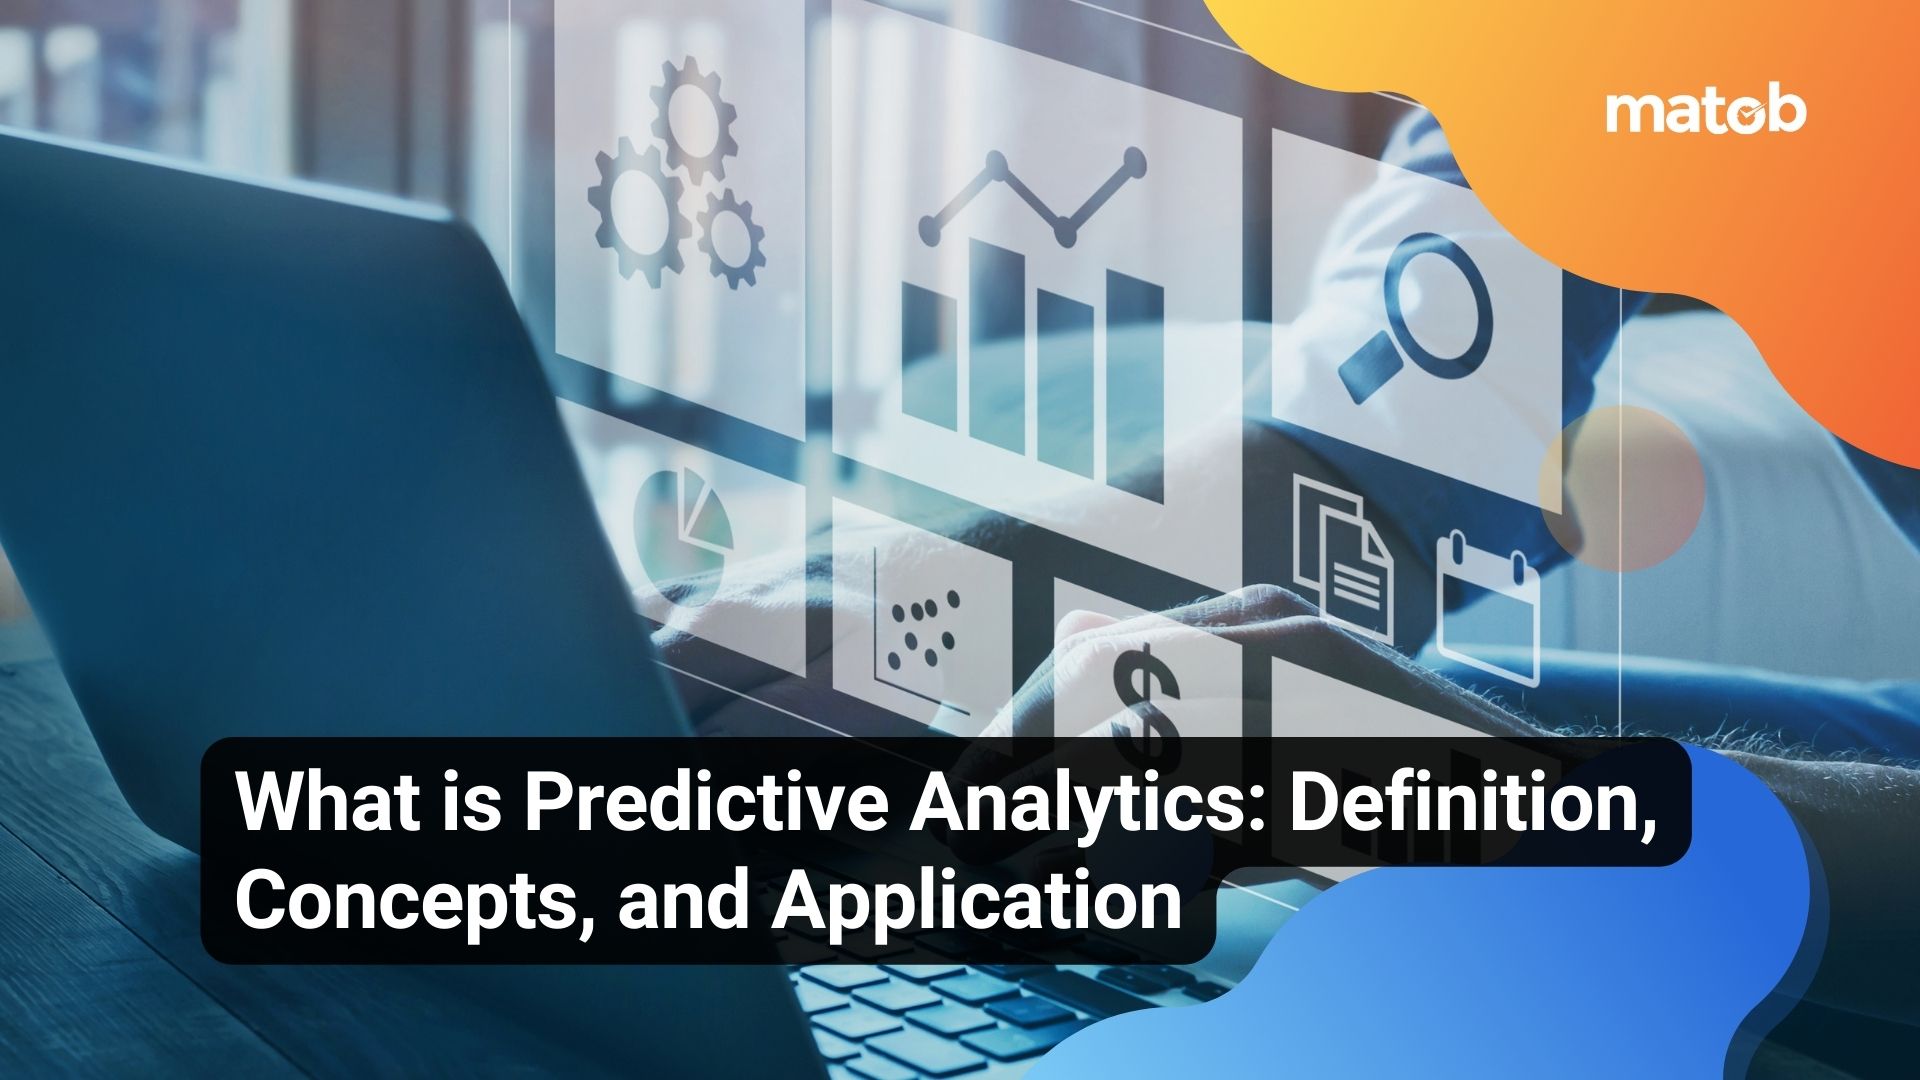 What is Predictive Analytics: Definition, Concepts, and Application